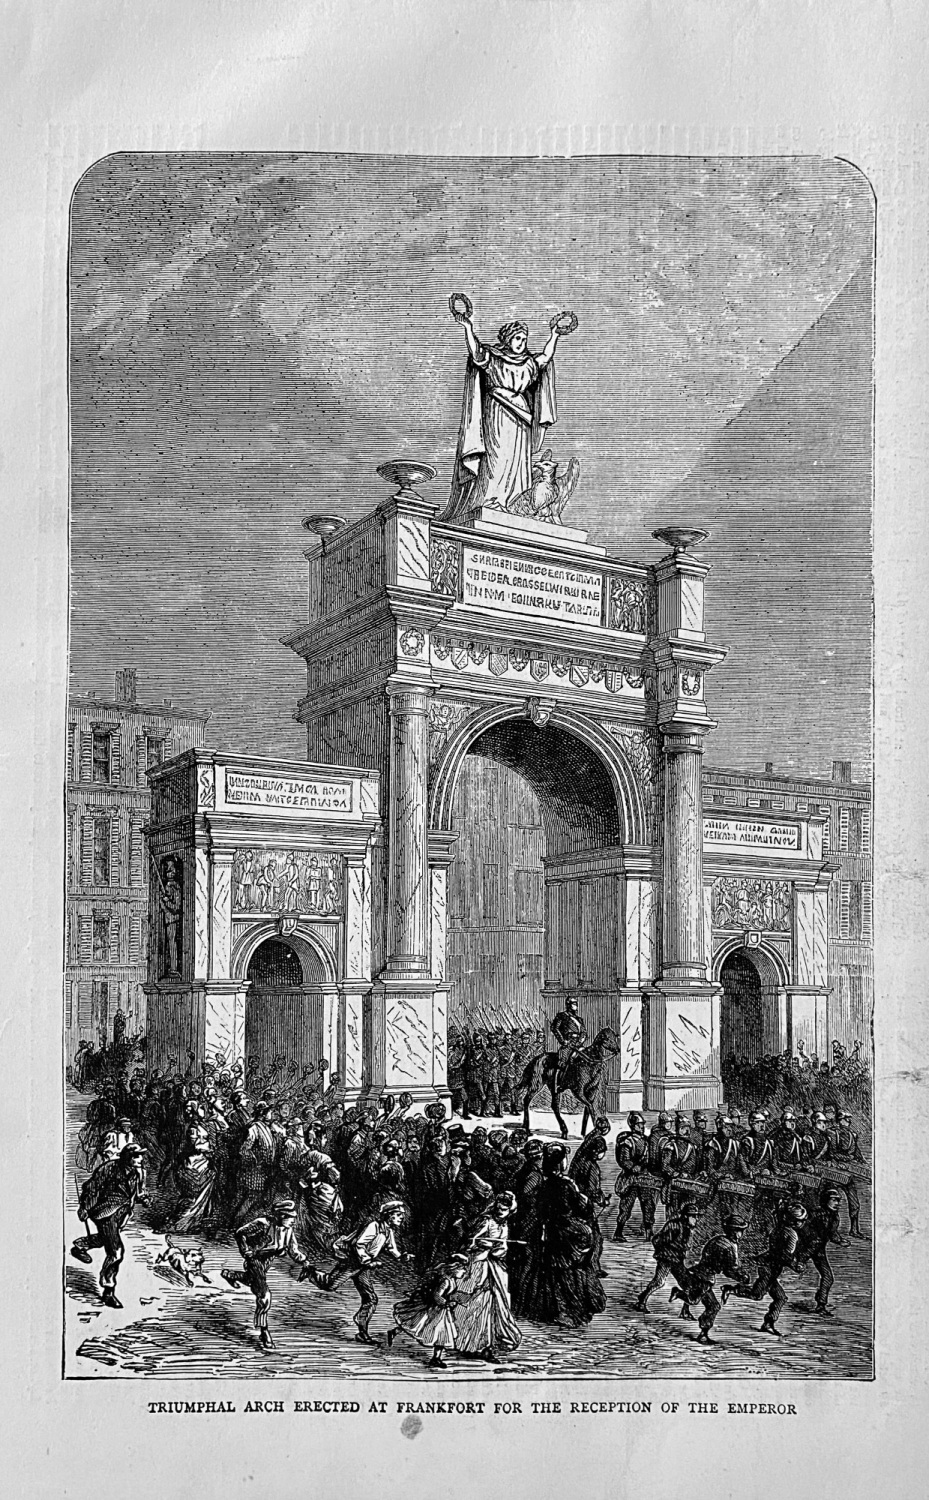 Triumphal Arch Erected at Frankfort for the Reception of the Emperor. 1871.